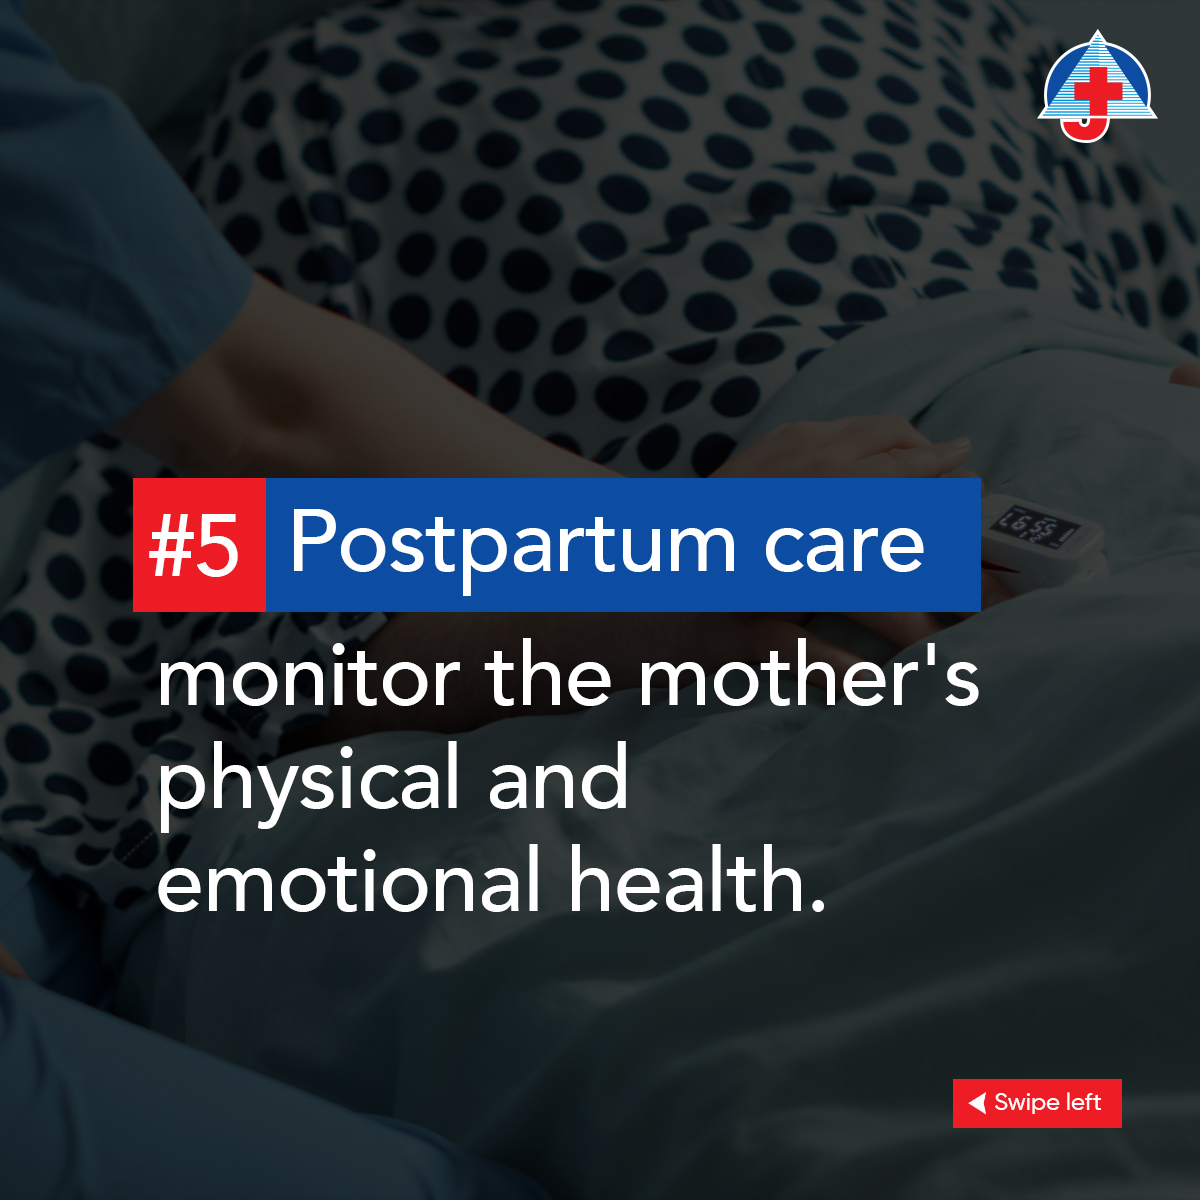 It is important to prioritize postpartum care to ensure every mother has access to the support and resources she needs for a healthy recovery and a positive start to motherhood. #postpartumcare #maternalhealth #Motherhood